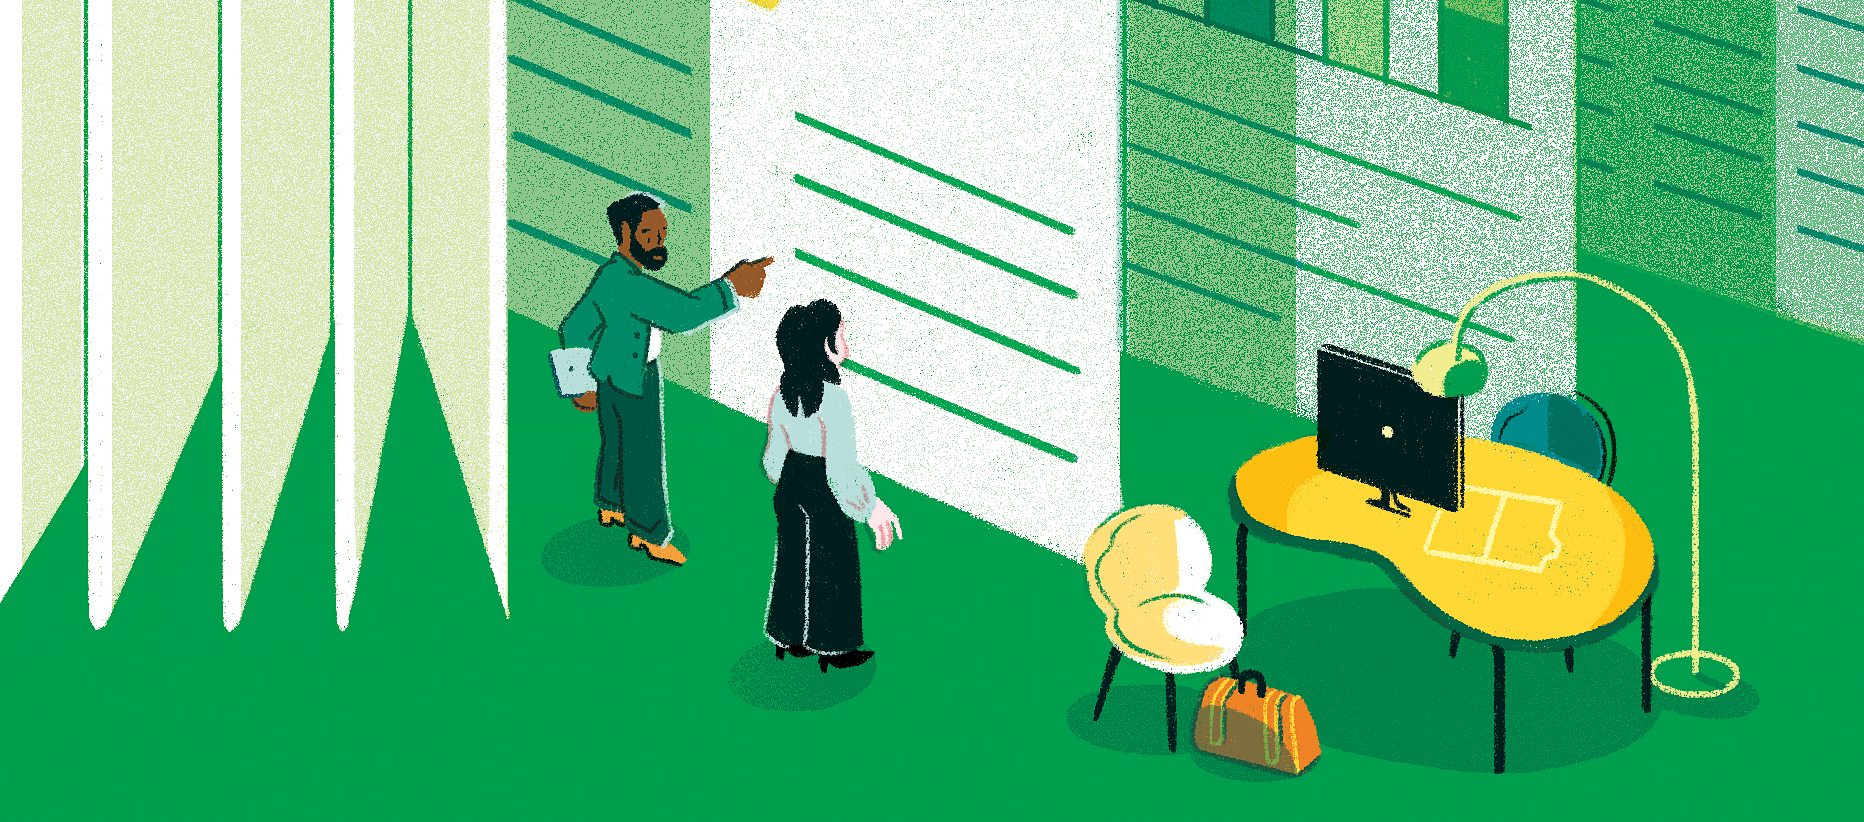 Illustration of two people in an office looking at large financial statements on the wall